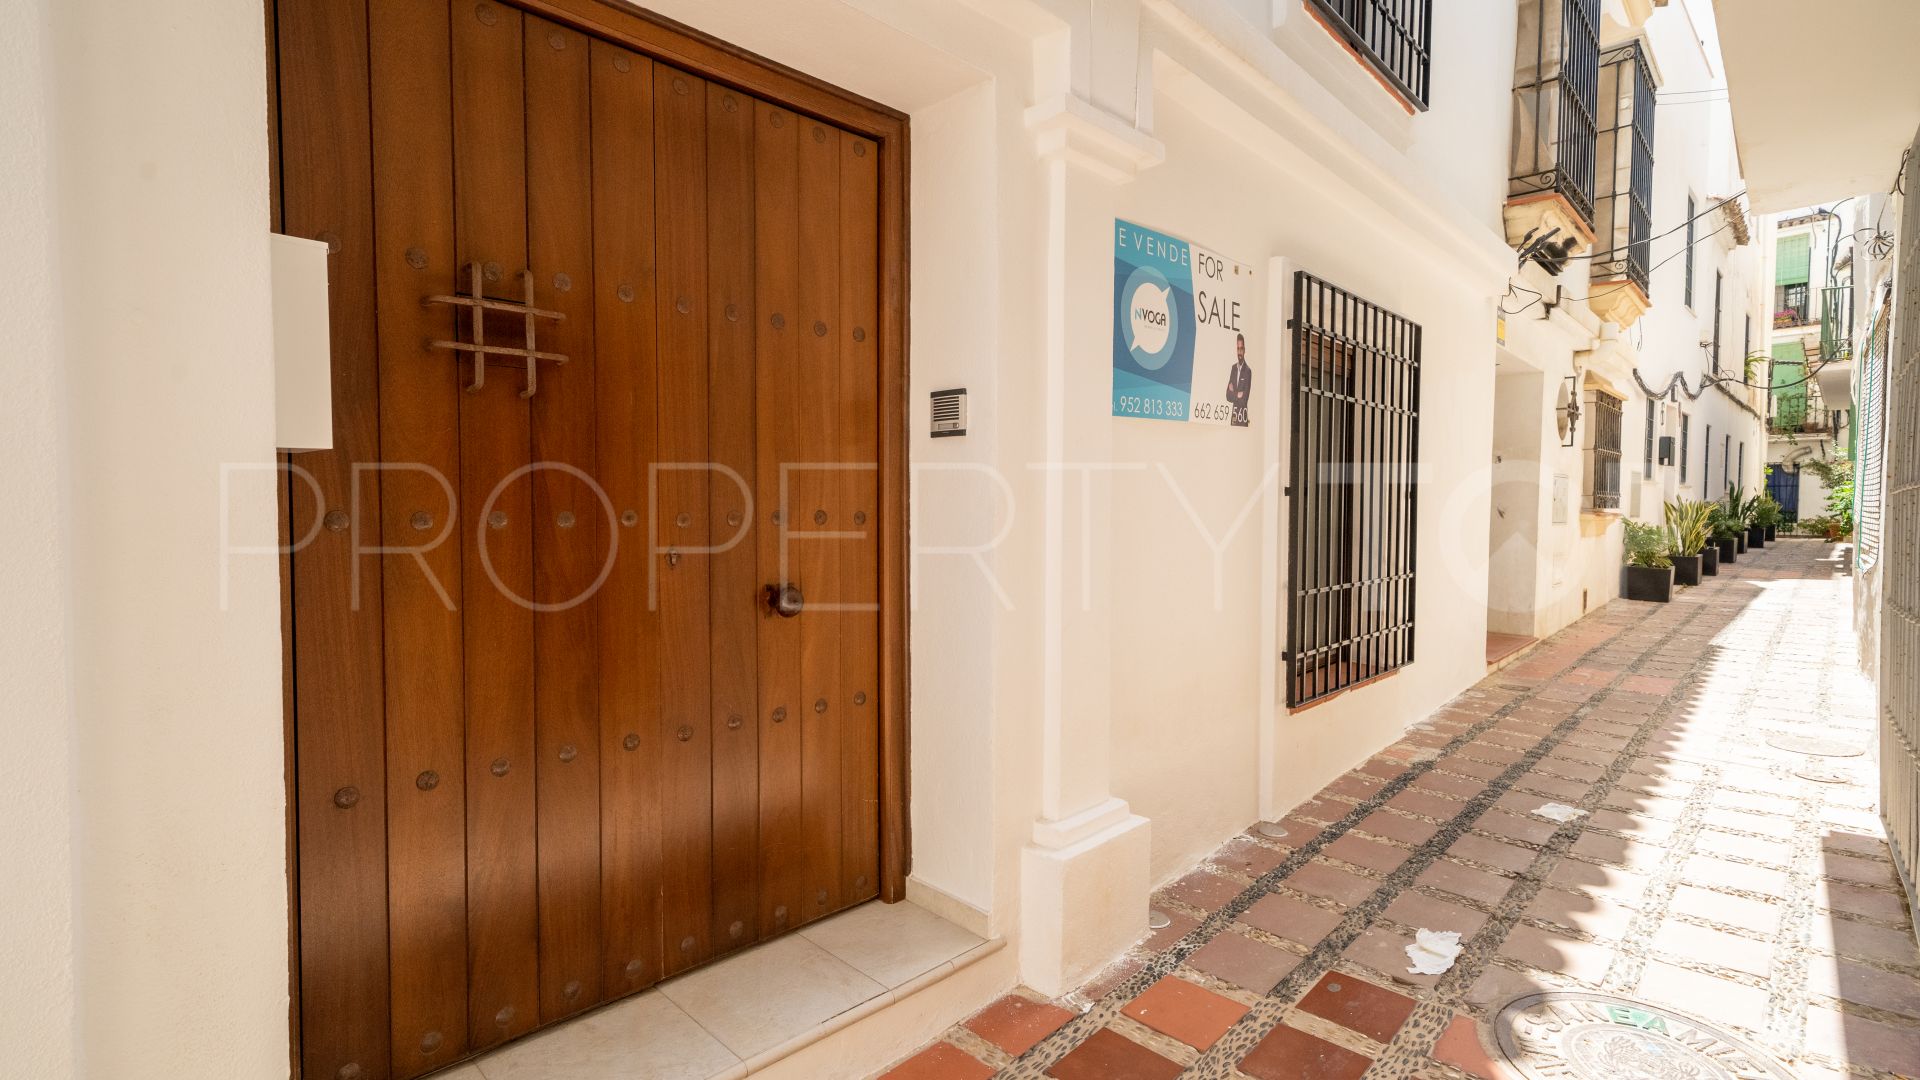 4 bedrooms house in Casco antiguo for sale